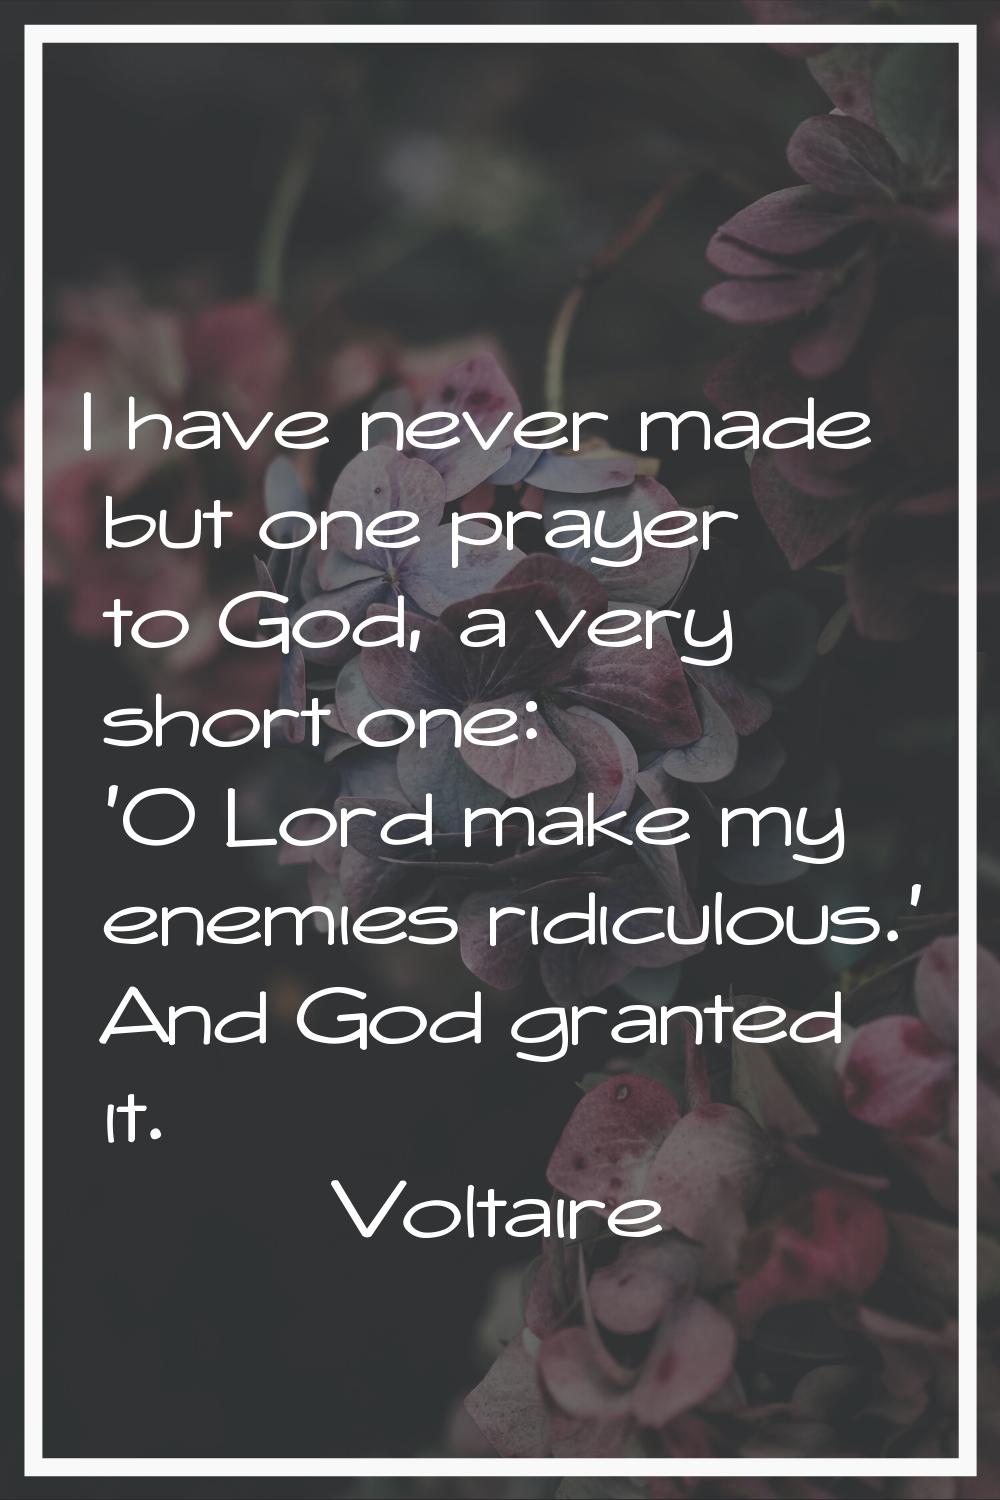 I have never made but one prayer to God, a very short one: 'O Lord make my enemies ridiculous.' And